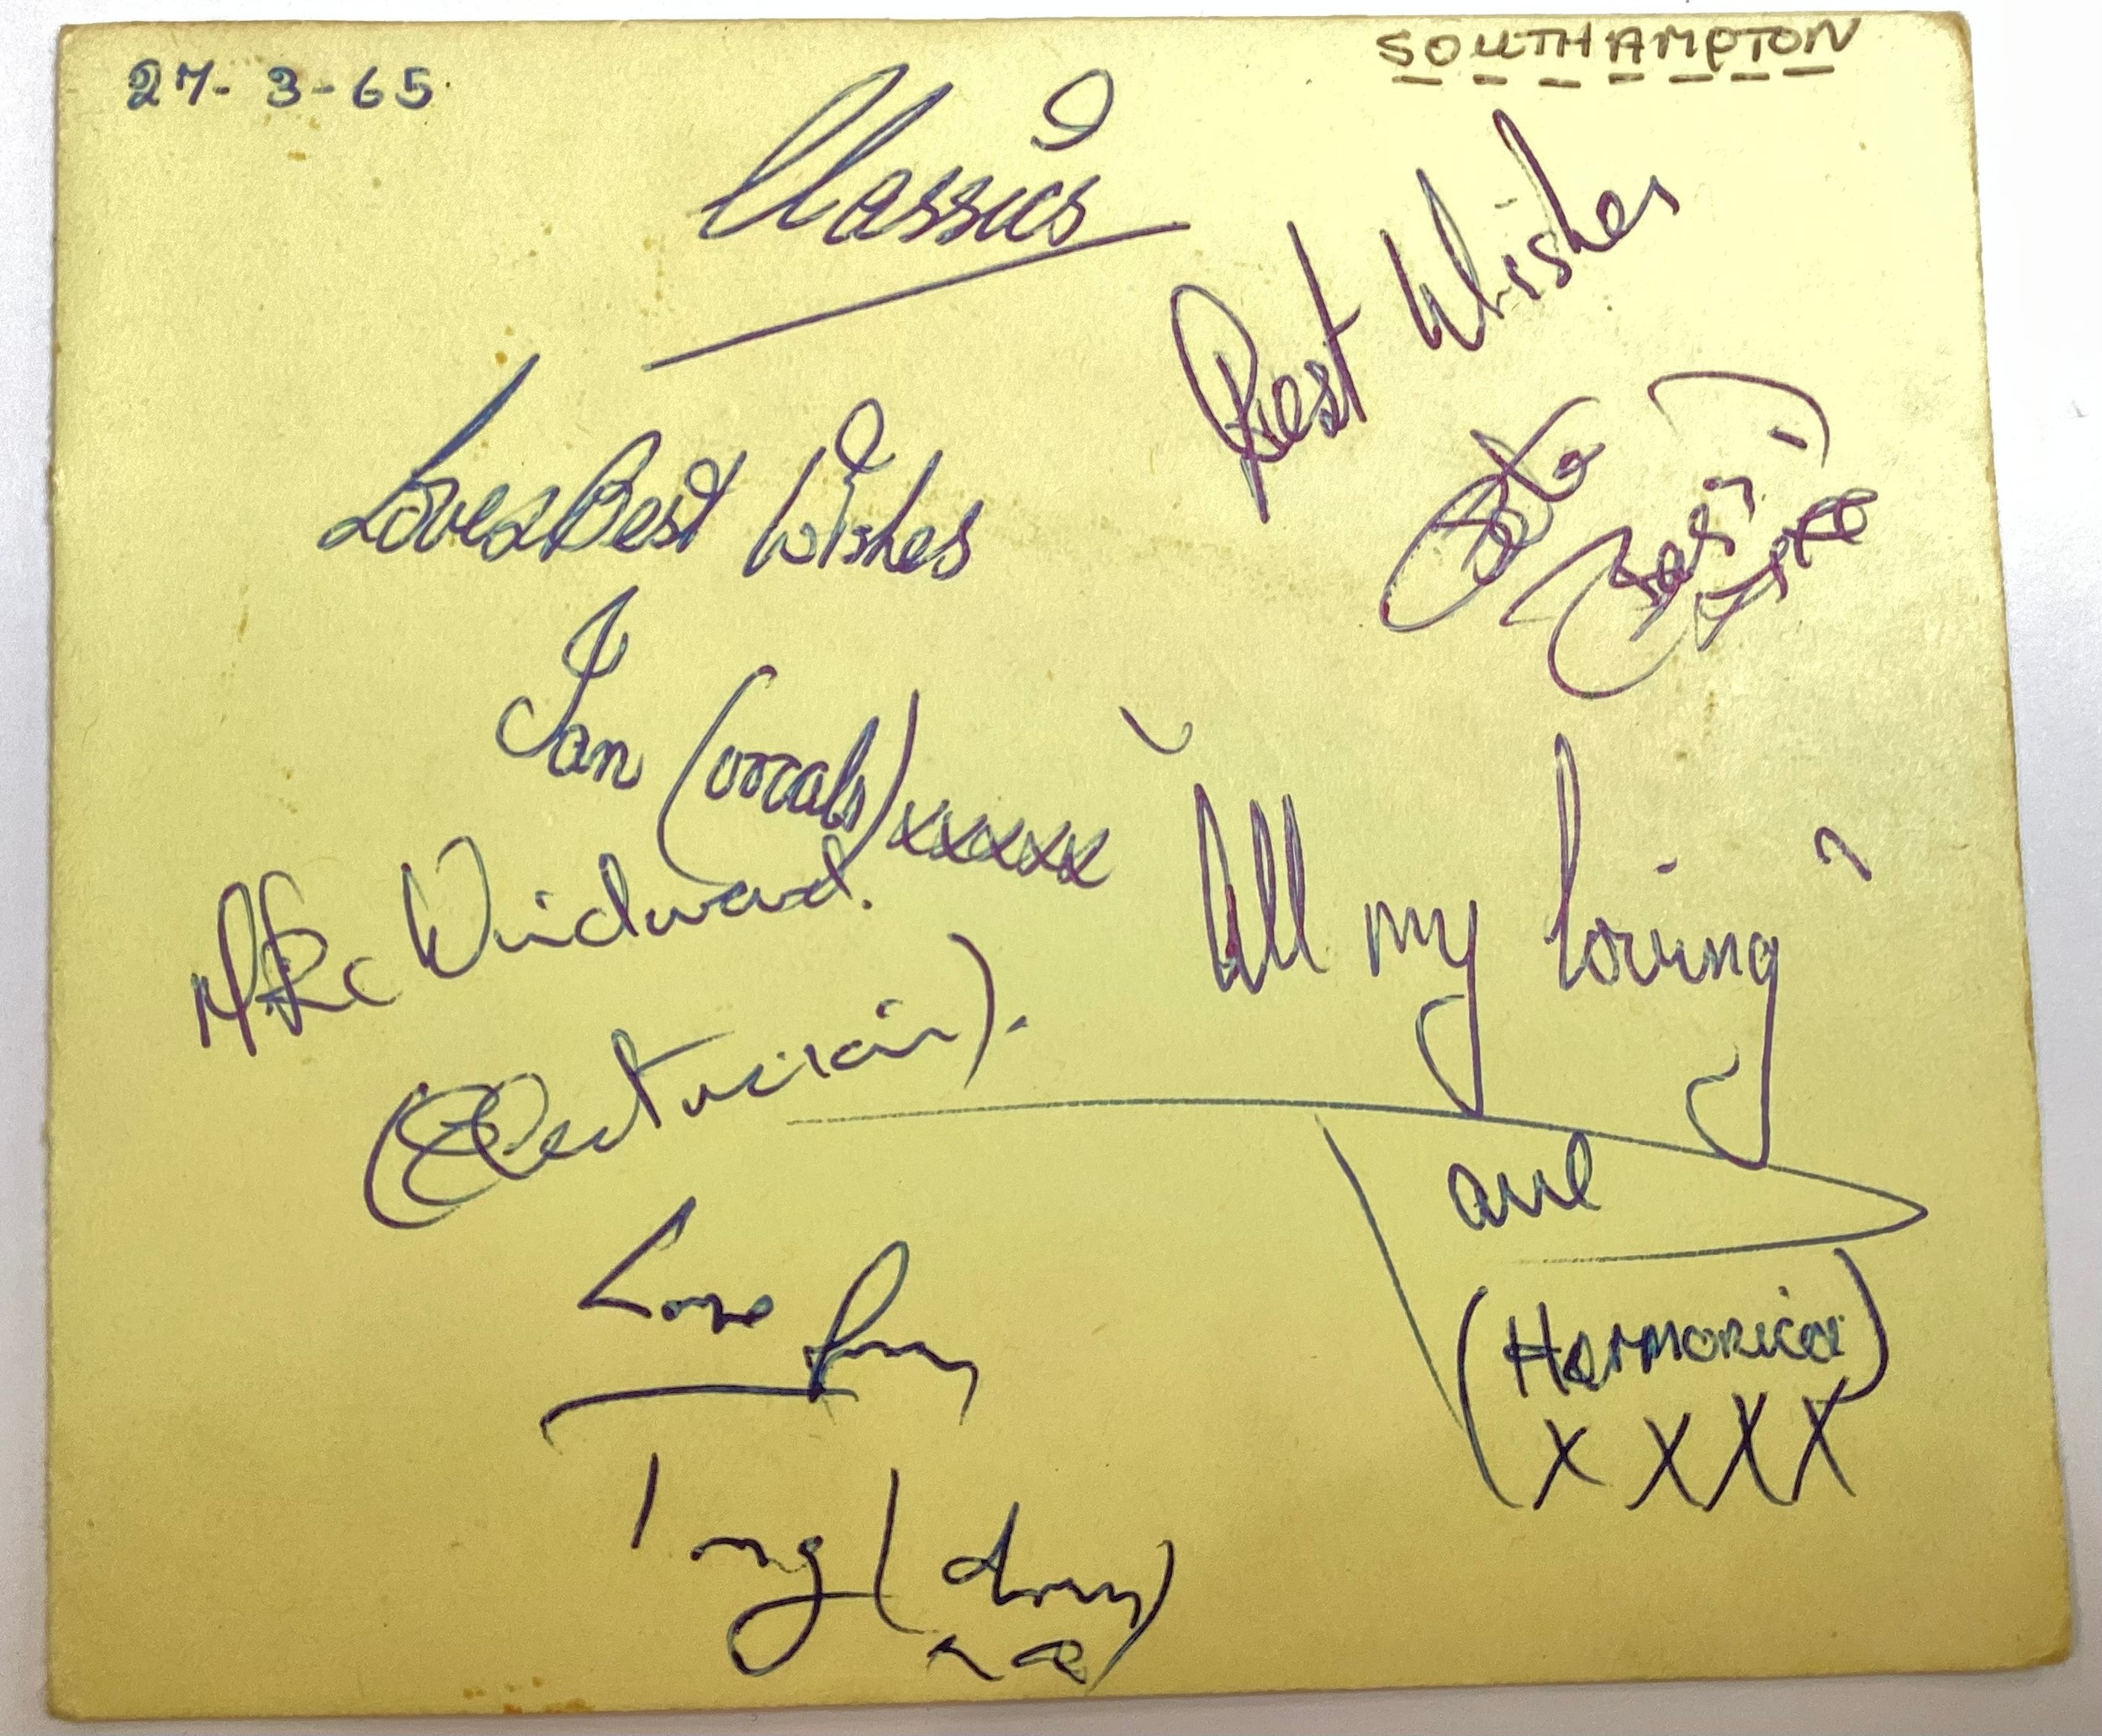 GENUINE 1960’S AUTOGRAPH BOOK CONTAINING VARIOUS POP / ROCK STARS. The book has seen better days - Image 3 of 14